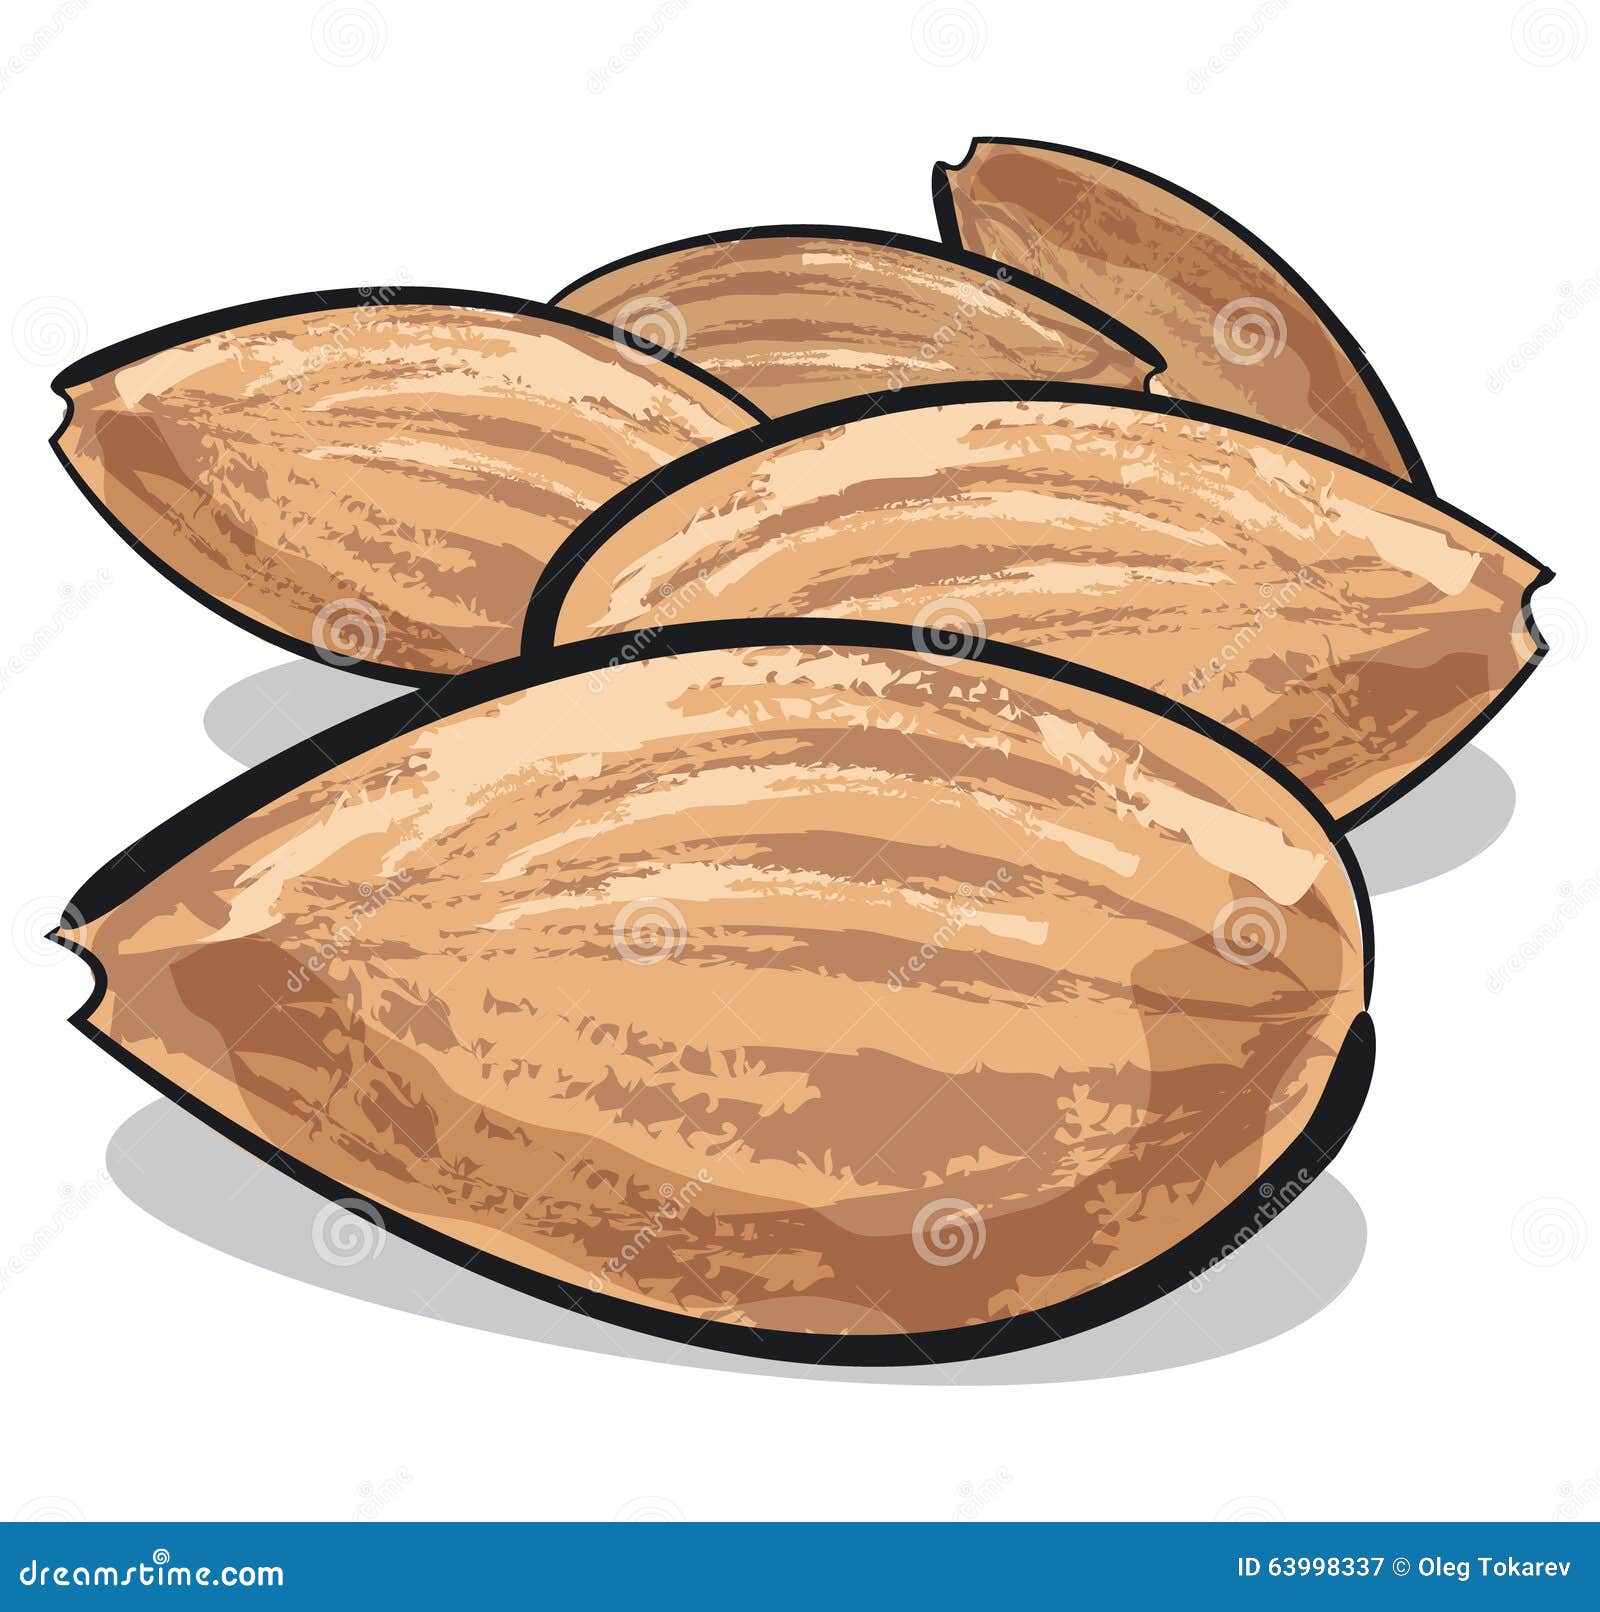 Almonds Cartoons, Illustrations & Vector Stock Images - 3238 Pictures